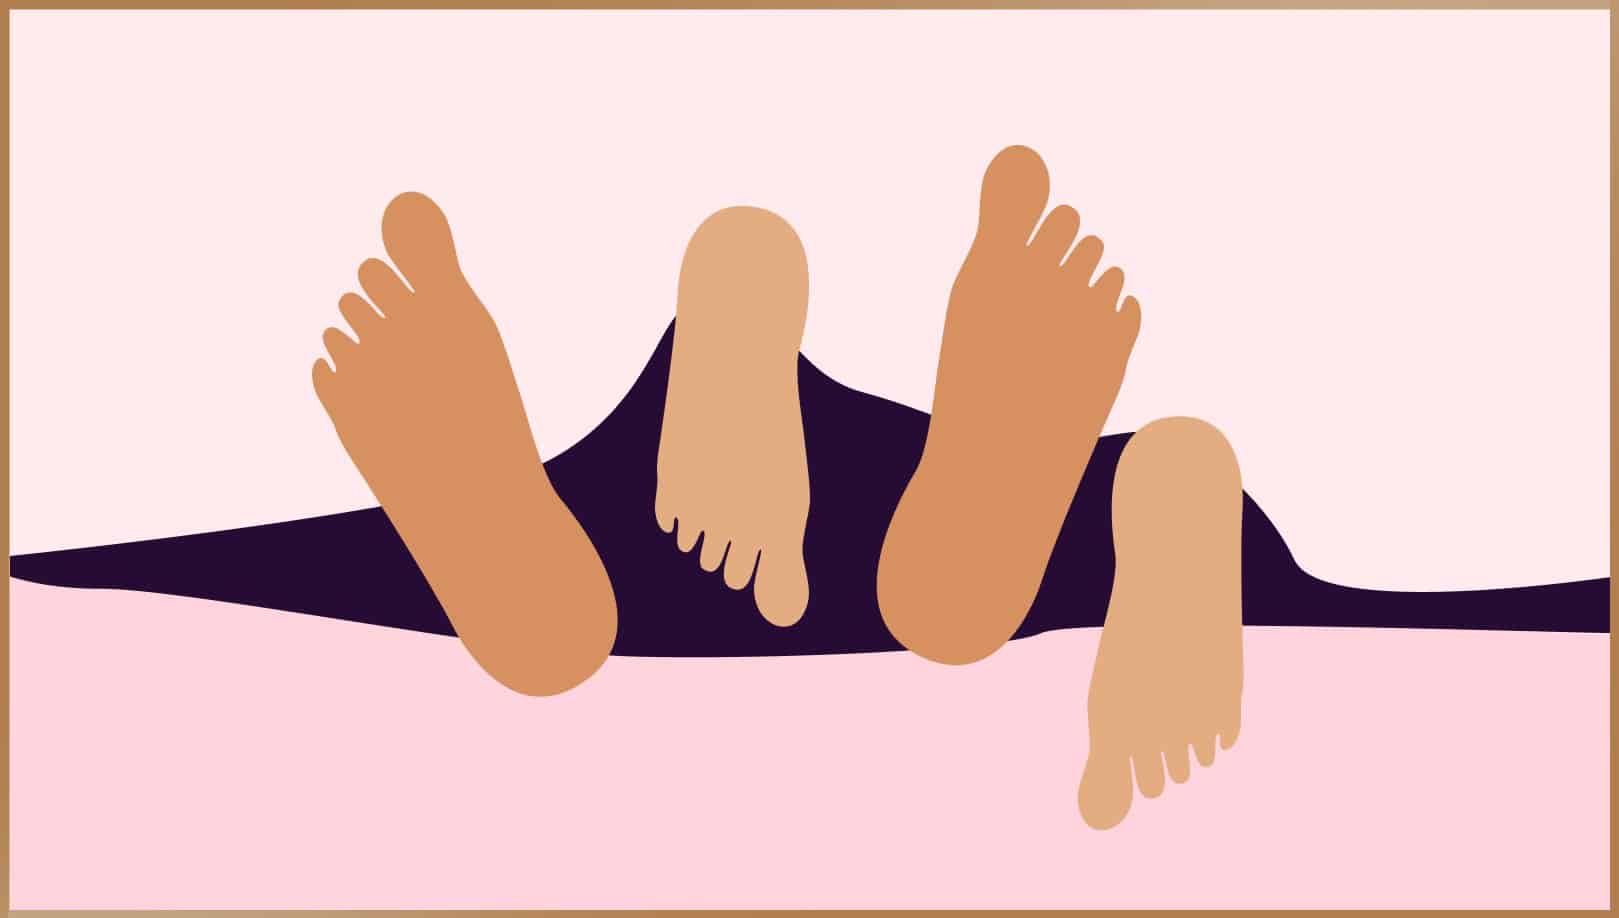 Illustration of two pairs of feet peeking out from under a blanket, symbolizing intimacy and the personal nature of sexual wellness